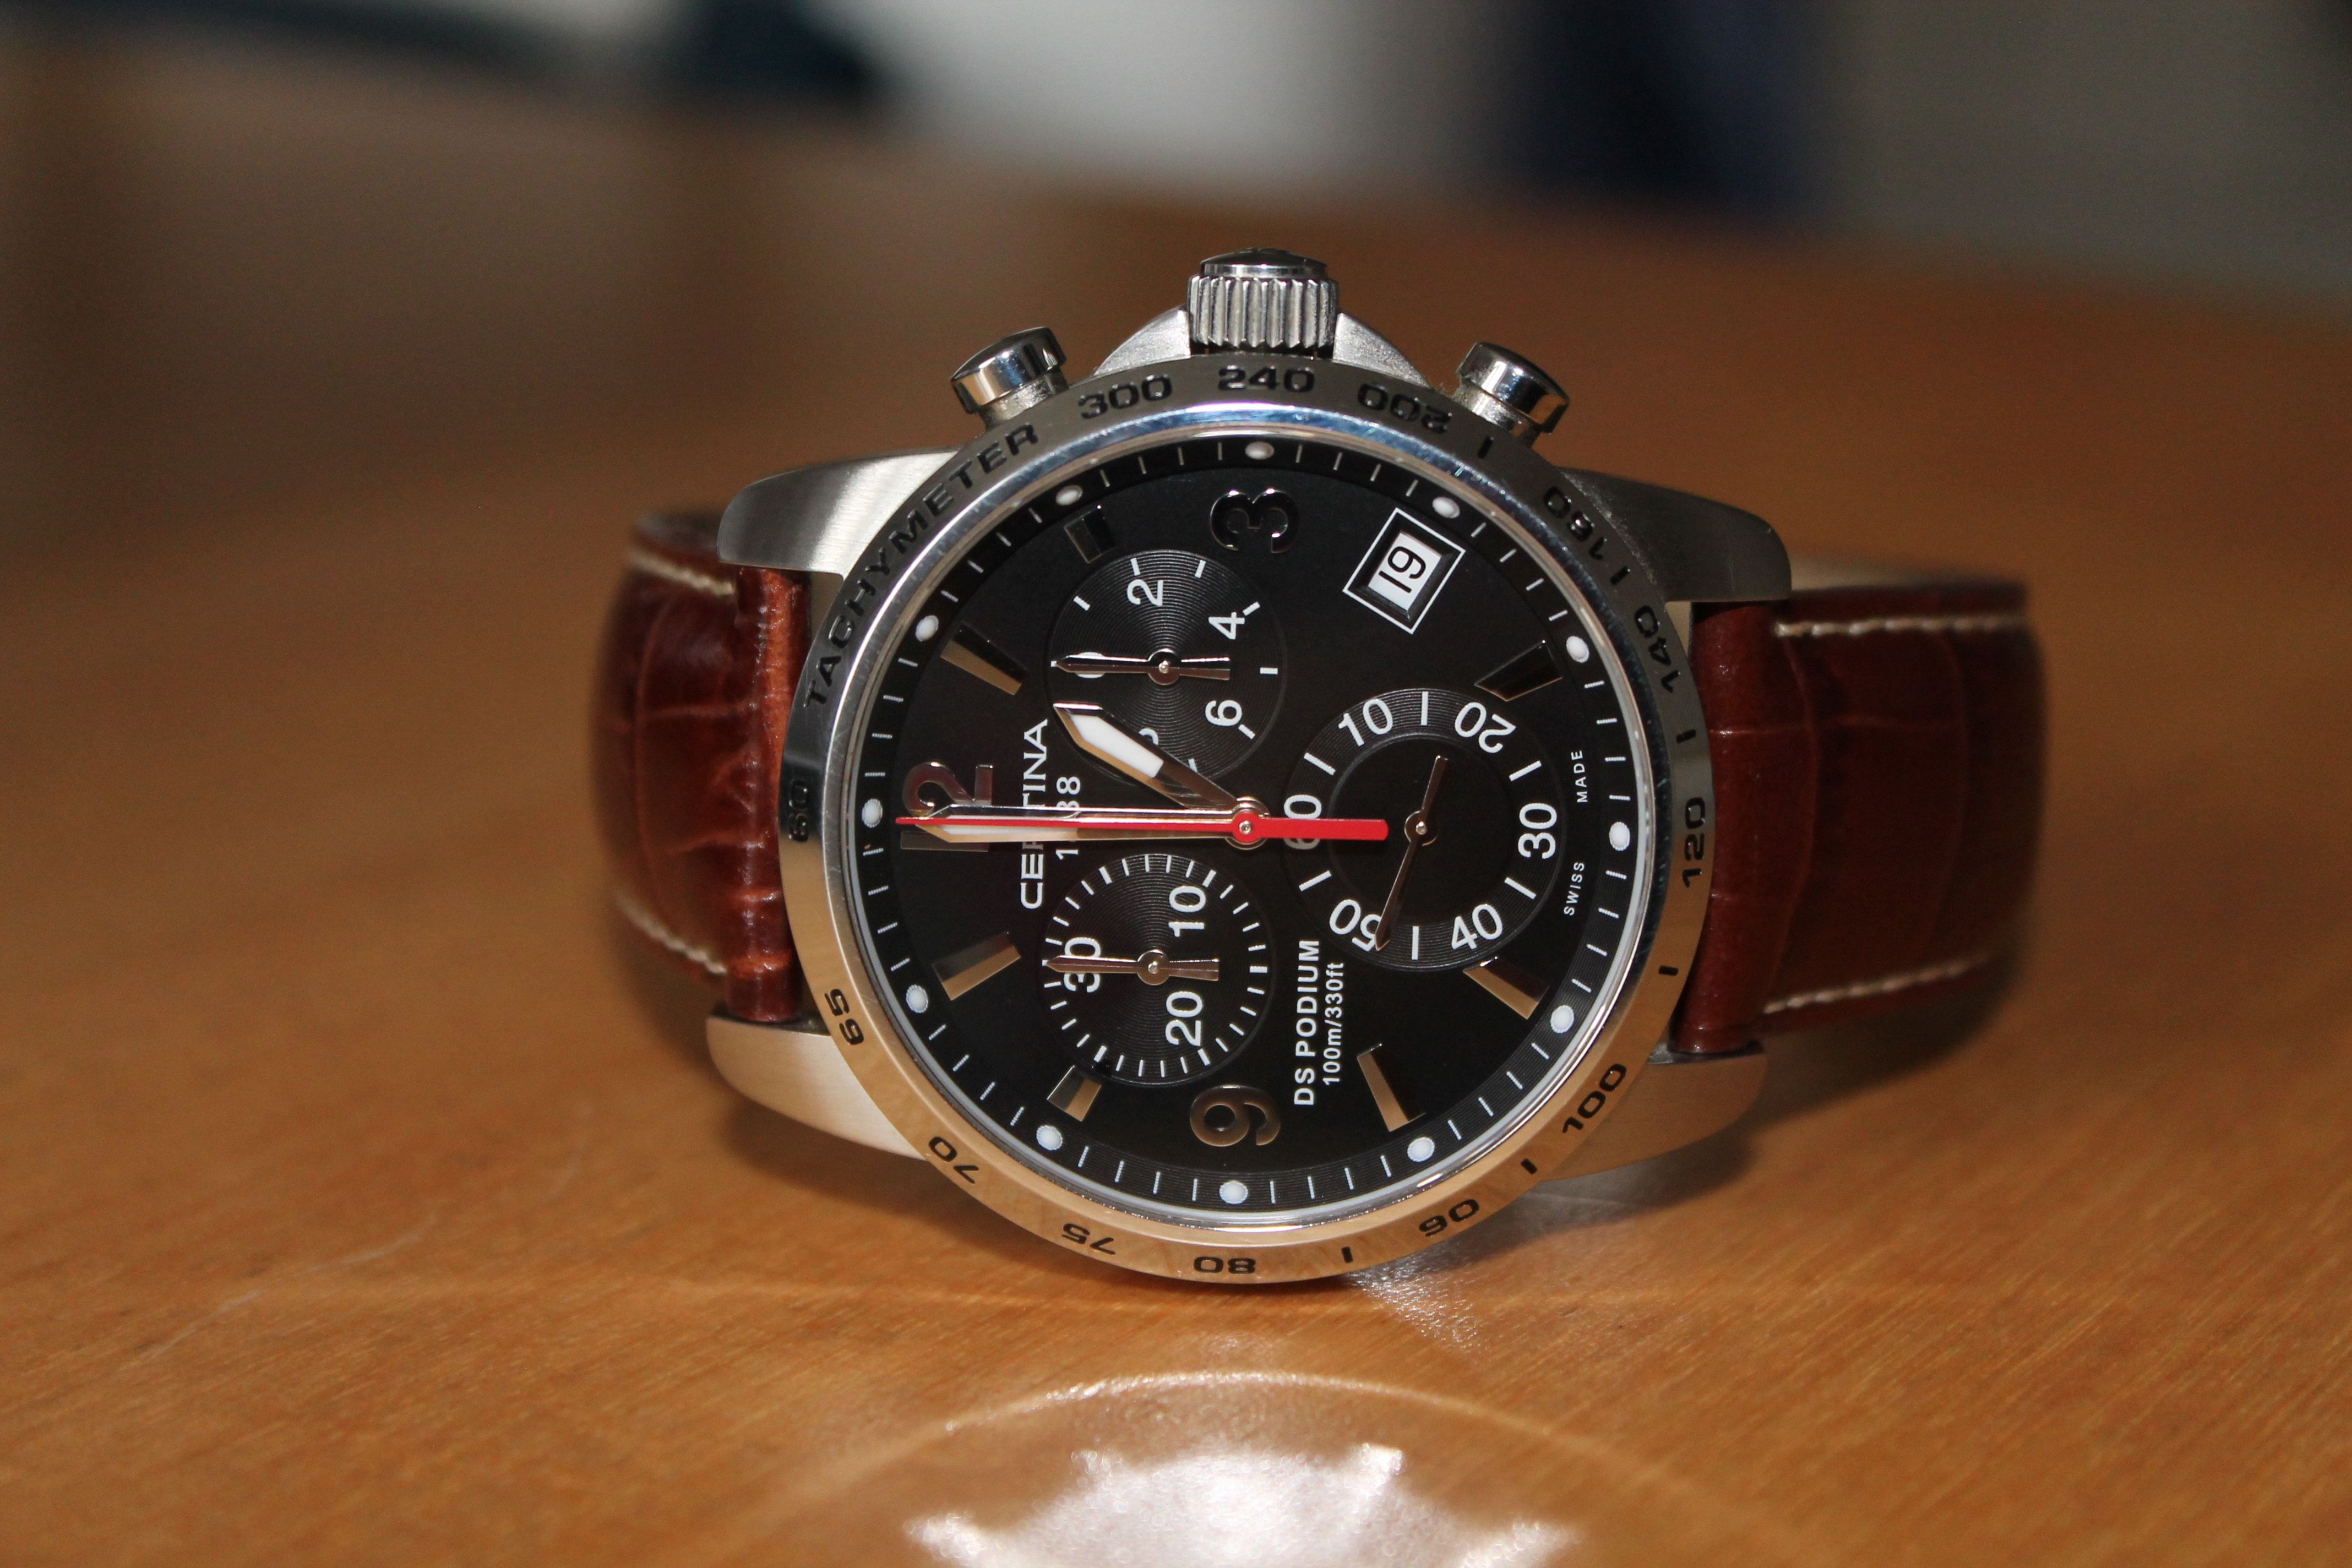 chronograph watch at 9:35 free image